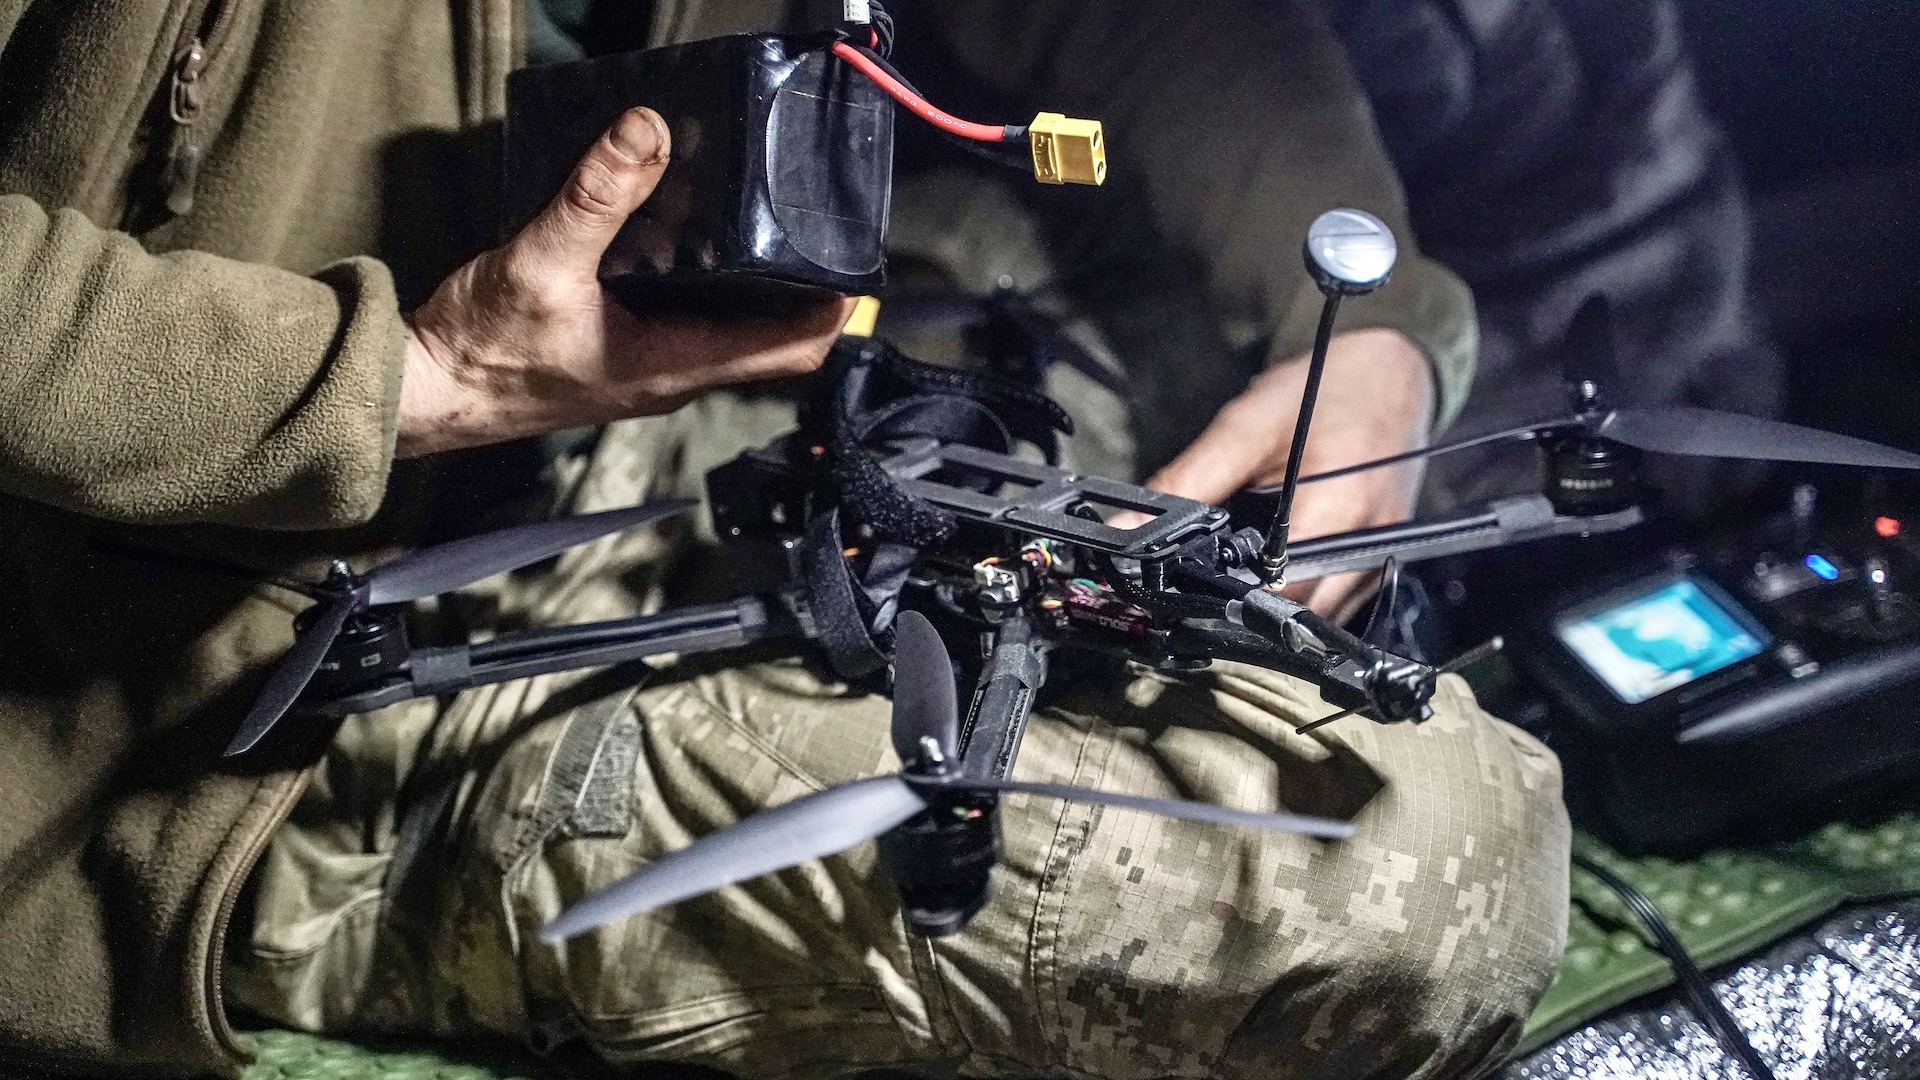 DONETSK OBLAST, UKRAINE - MAY 1: A drone operator, a Ukrainian soldier of the 56th Motorized Brigade with the call sign "Indianets", prepares a combat FPV drone in the Bakhmut area on May 1, 2024 in Donetsk Oblast, Ukraine. Ukrainian drones operators of the 56th Motorized Brigade are using combat FPV drones to destroy enemy targets and conduct round-the-clock reconnaissance in the Bakhmut area. (Photo by Yevhenii Vasyliev/Global Images Ukraine via Getty Images)